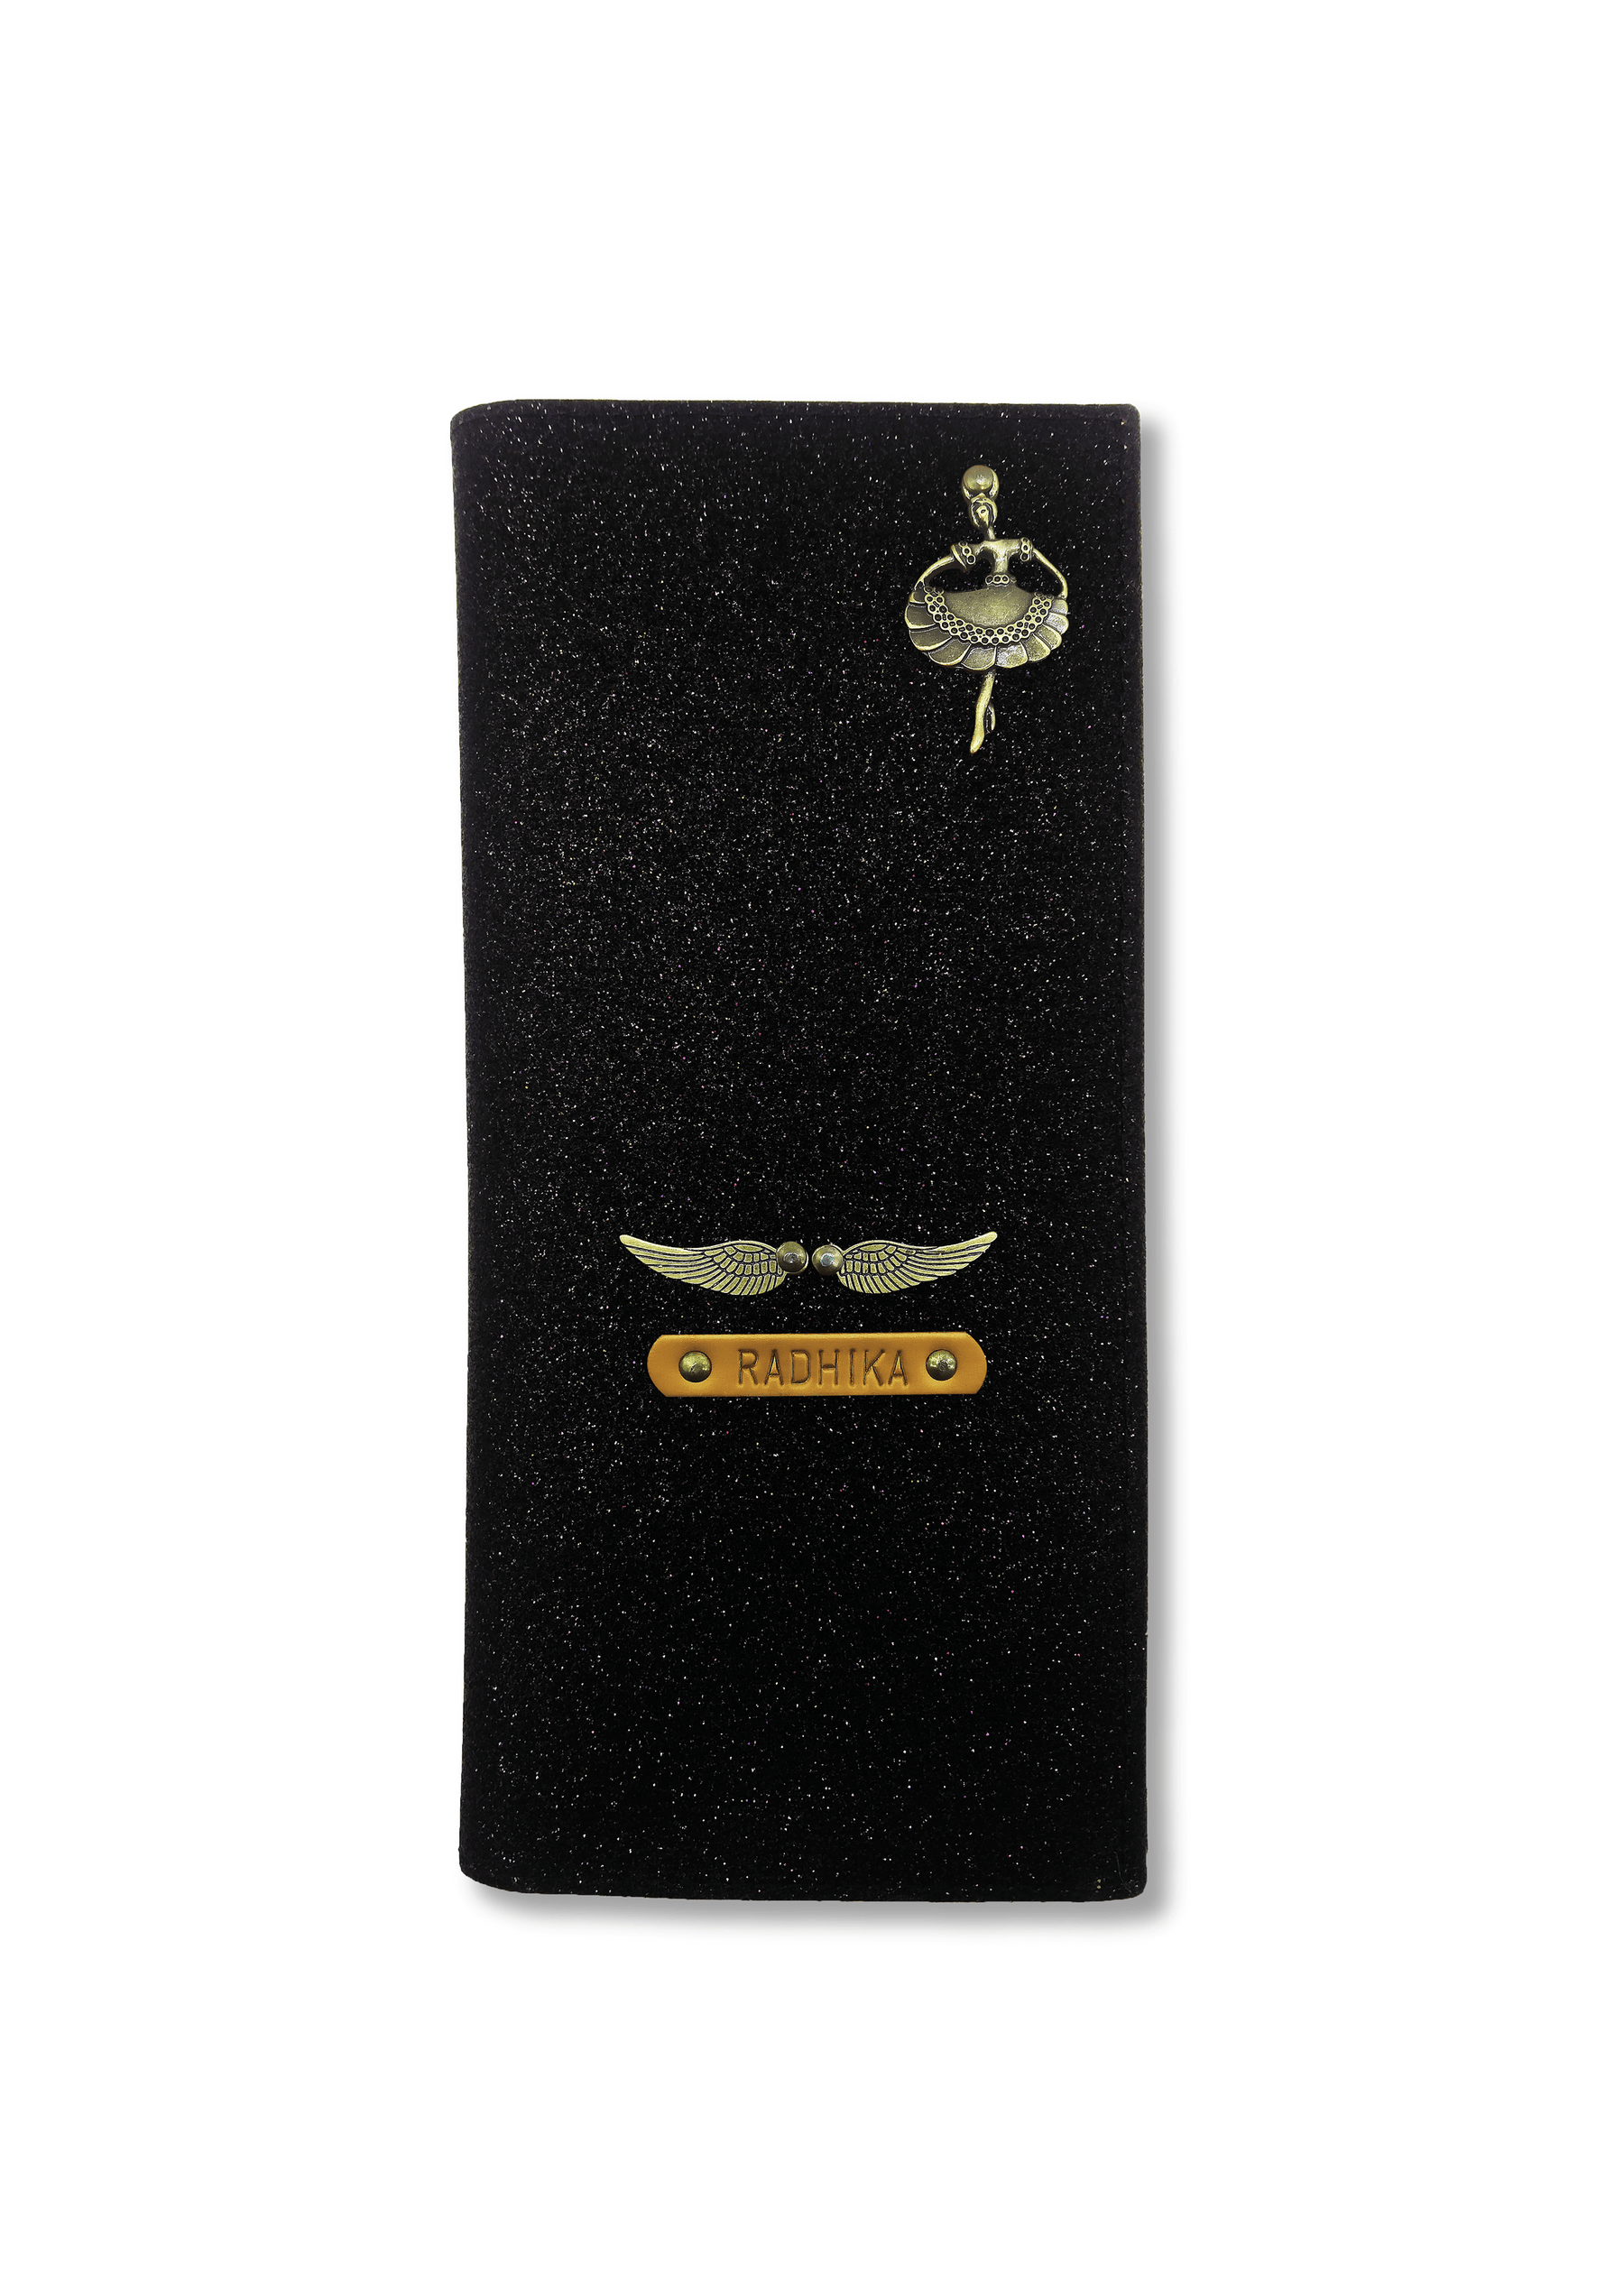 The Messy Corner Travel Wallet Personalized Travel Wallet - Black Glitter